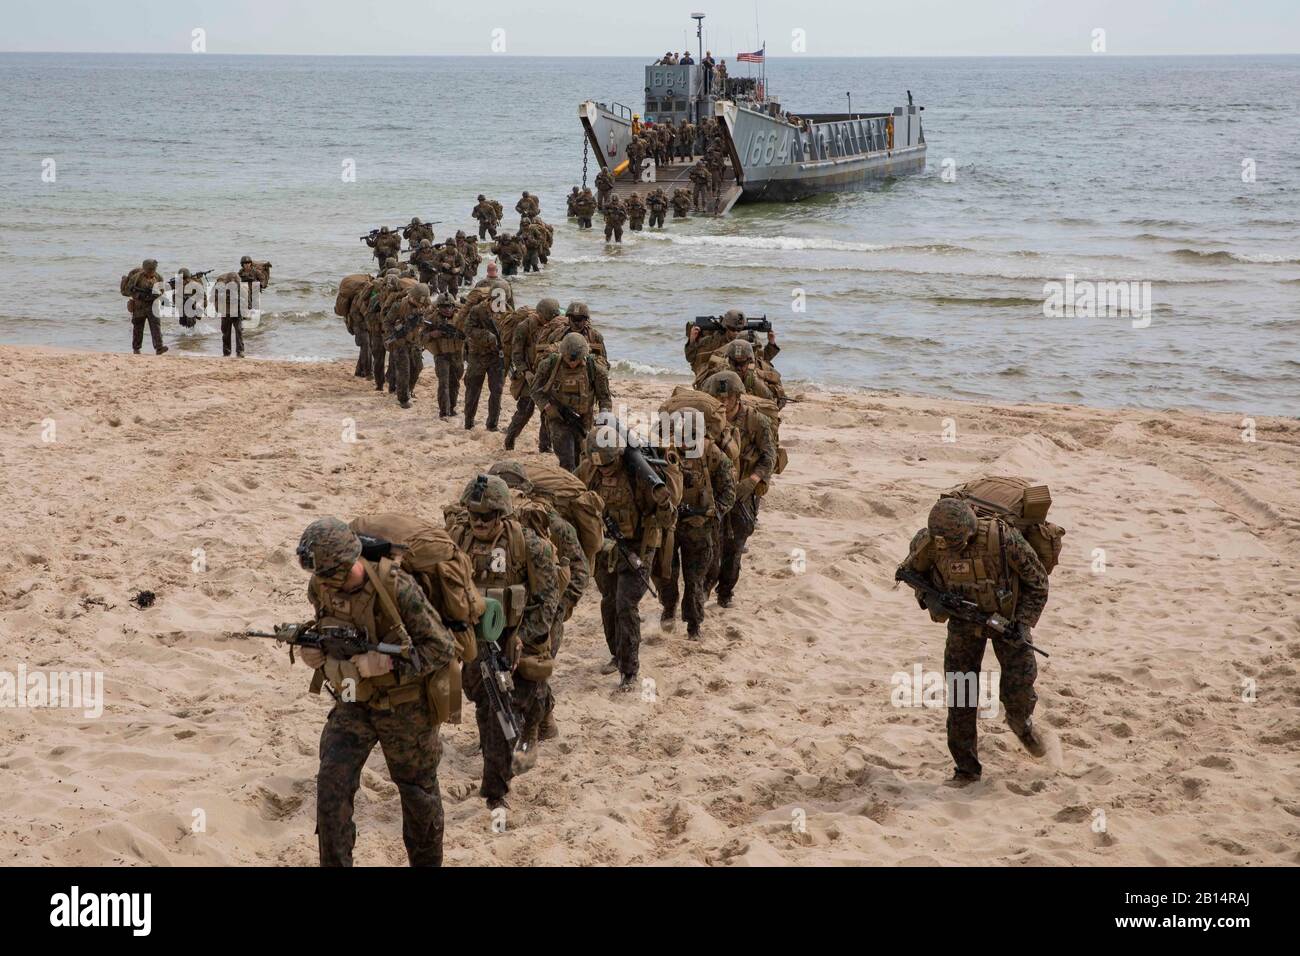 190619-M-QF372-1167 Sweden (June 19, 2019) – U.S. Marines disembark a Landing Craft, Utility during a tactics exercise in Sweden for Baltic Operations (BALTOPS) 2019. The Marines a part of Charlie Company, Battalion Landing Team 1st Battalion, 2nd Marine Regiment, maneuvered and assaulted an objective as a company for the exercise. BALTOPS is an annual joint, multinational maritime-focused exercise. It is designed to improve training for participants, enhance flexibility and interoperability, and demonstrate resolve among allied and partner forces in defending the Baltic Sea region. (U.S. Mari Stock Photo